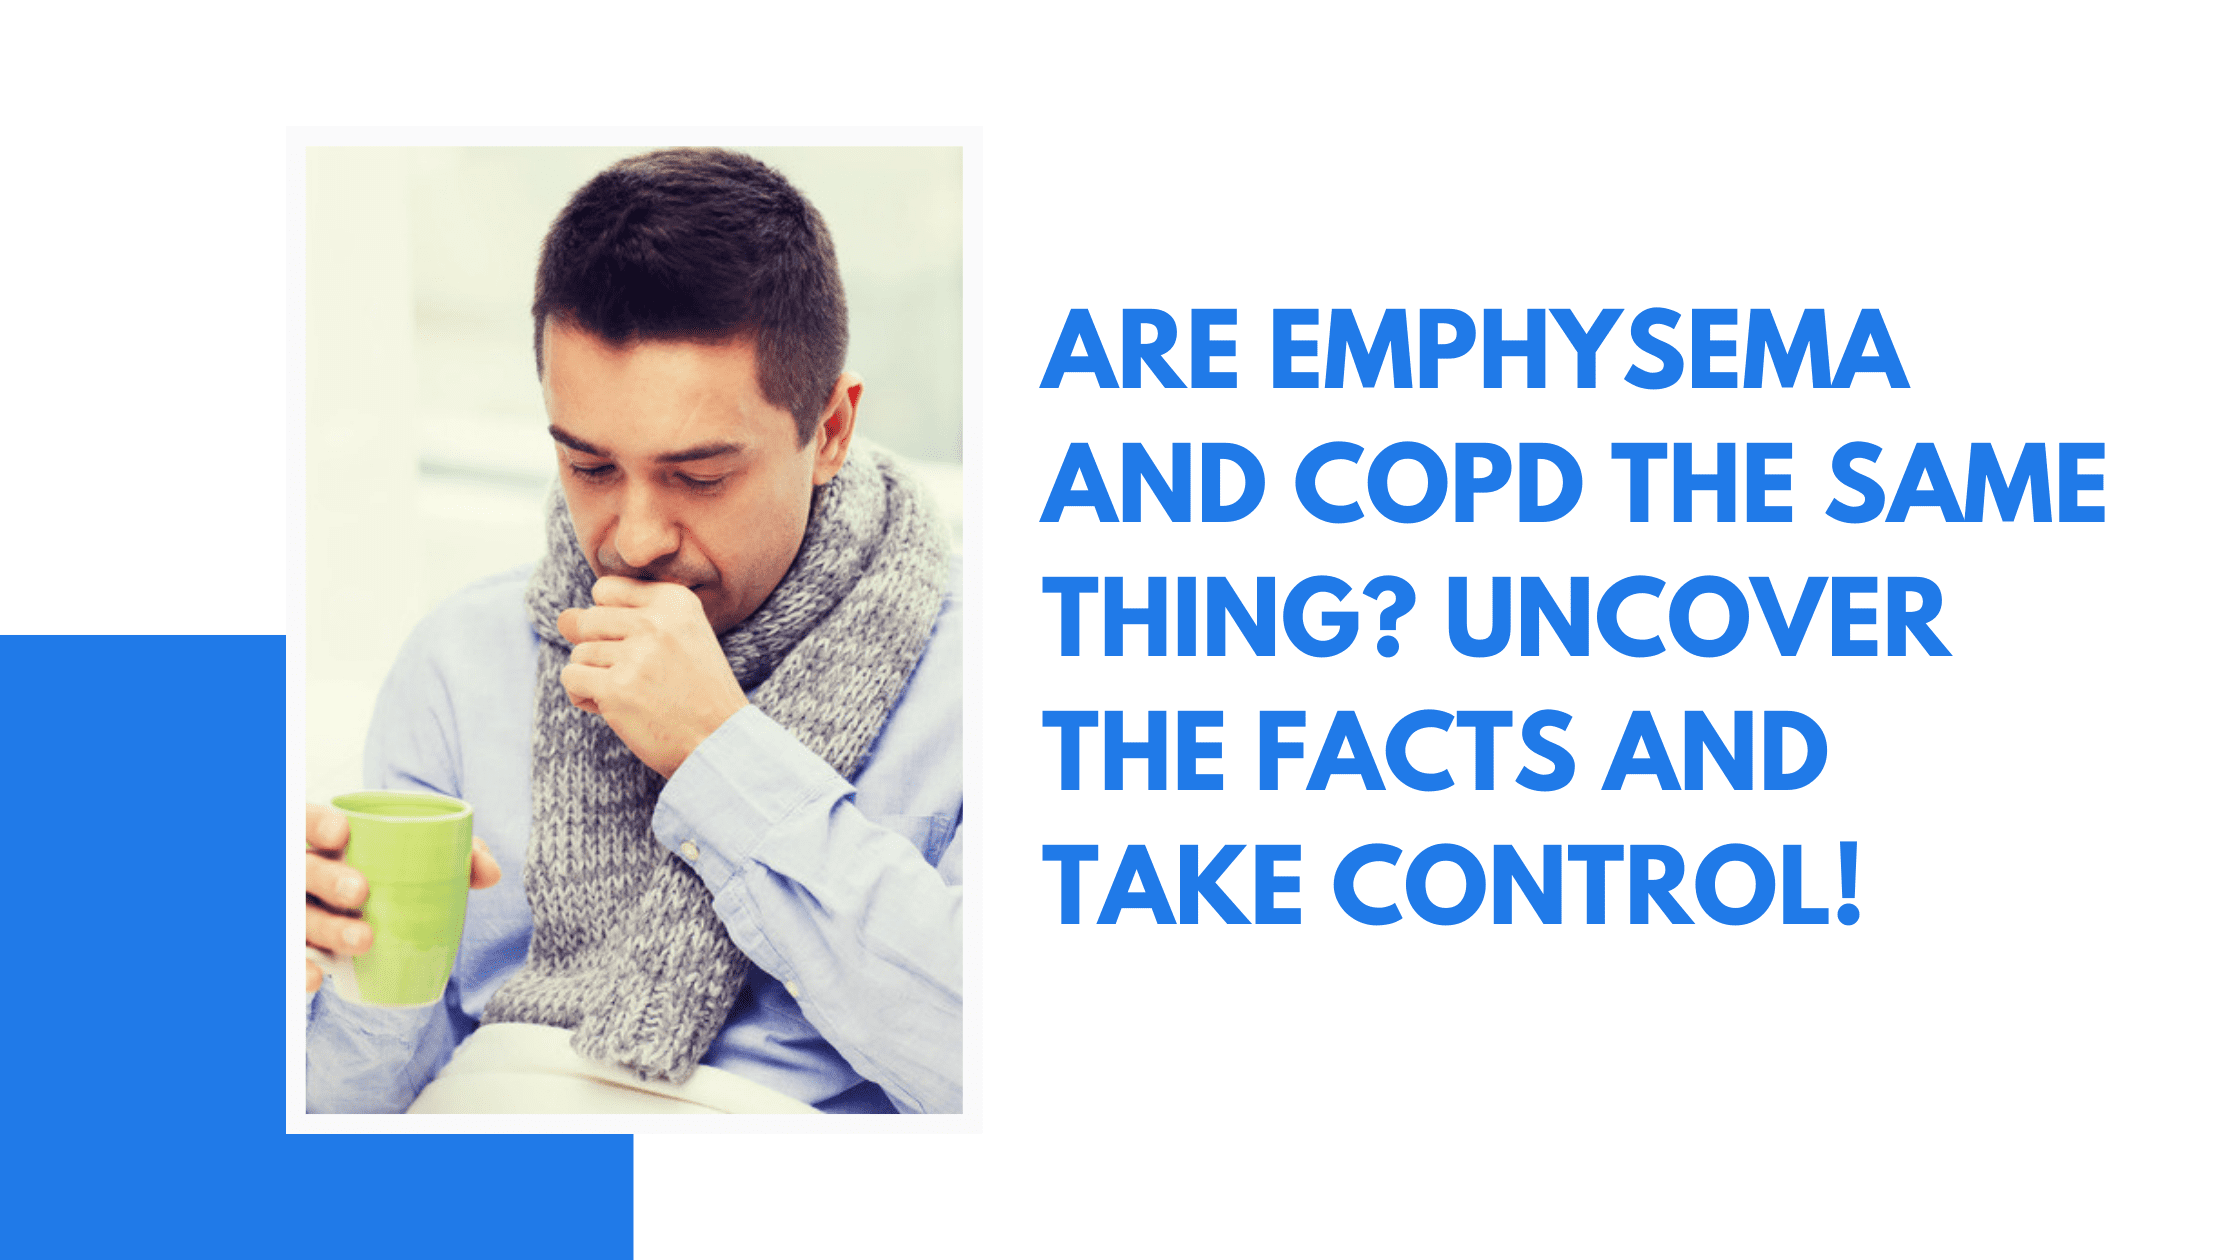 Emphysema and COPD